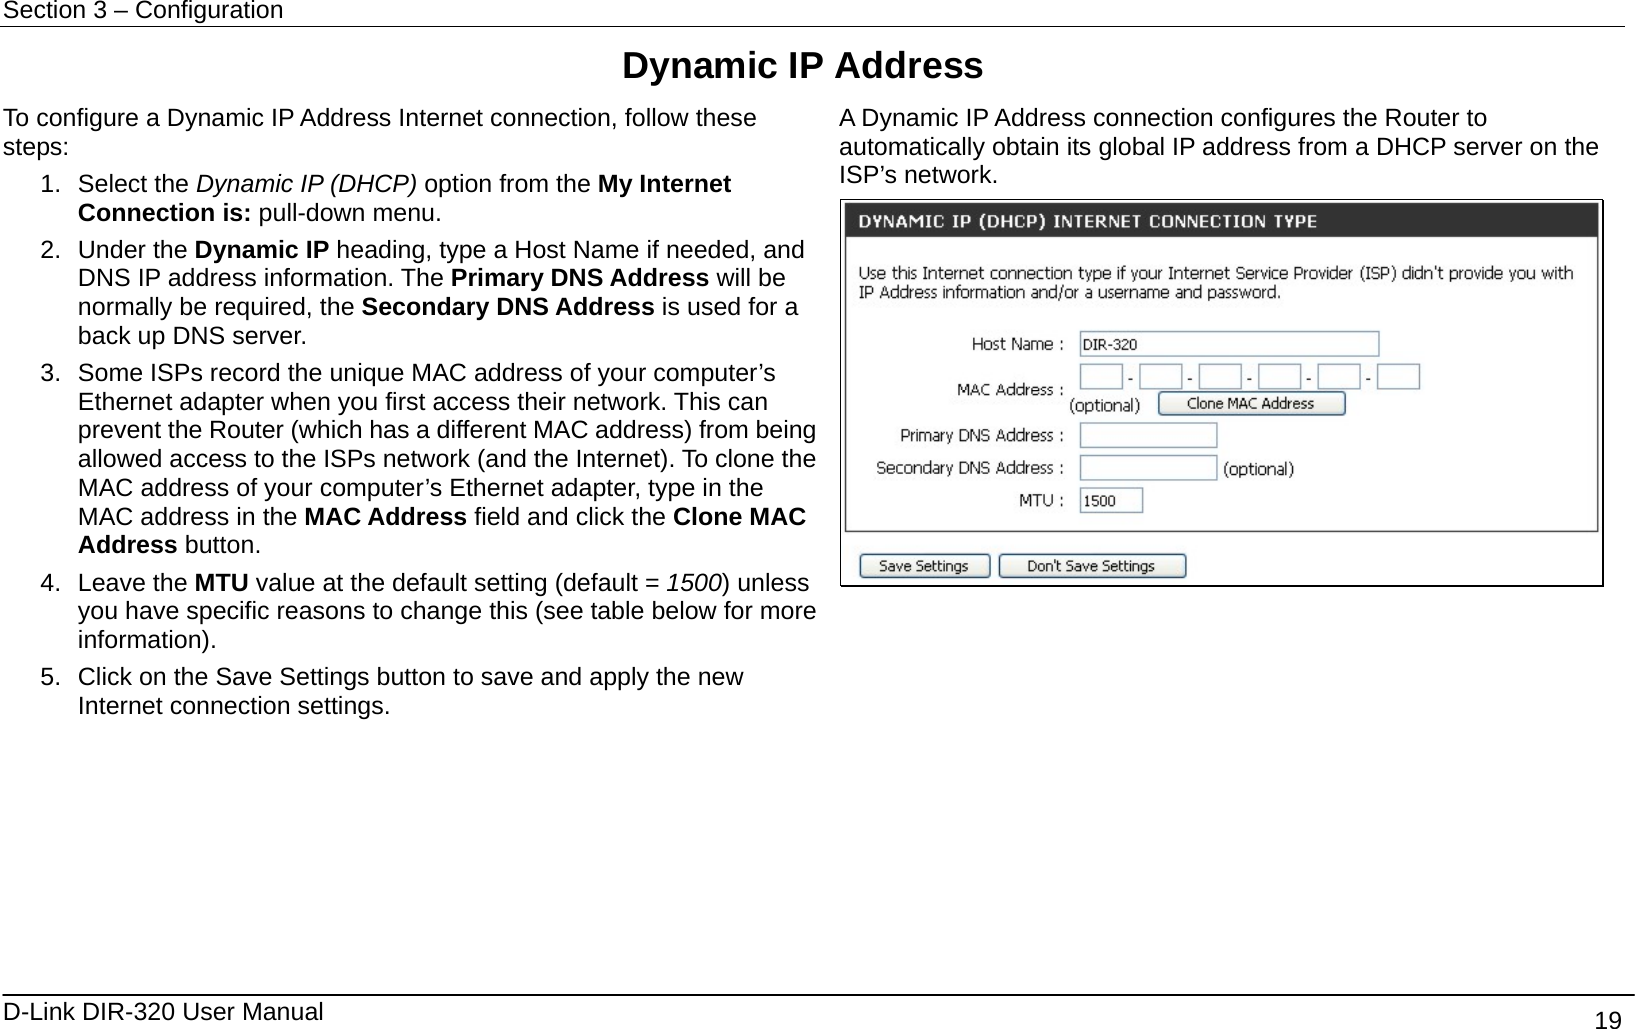 Section 3 – Configuration   D-Link DIR-320 User Manual                                       19 Dynamic IP Address To configure a Dynamic IP Address Internet connection, follow these steps: 1. Select the Dynamic IP (DHCP) option from the My Internet Connection is: pull-down menu. 2. Under the Dynamic IP heading, type a Host Name if needed, and DNS IP address information. The Primary DNS Address will be normally be required, the Secondary DNS Address is used for a back up DNS server. 3.  Some ISPs record the unique MAC address of your computer’s Ethernet adapter when you first access their network. This can prevent the Router (which has a different MAC address) from being allowed access to the ISPs network (and the Internet). To clone the MAC address of your computer’s Ethernet adapter, type in the MAC address in the MAC Address field and click the Clone MAC Address button. 4. Leave the MTU value at the default setting (default = 1500) unless you have specific reasons to change this (see table below for more information). 5.  Click on the Save Settings button to save and apply the new Internet connection settings. A Dynamic IP Address connection configures the Router to automatically obtain its global IP address from a DHCP server on the ISP’s network.         